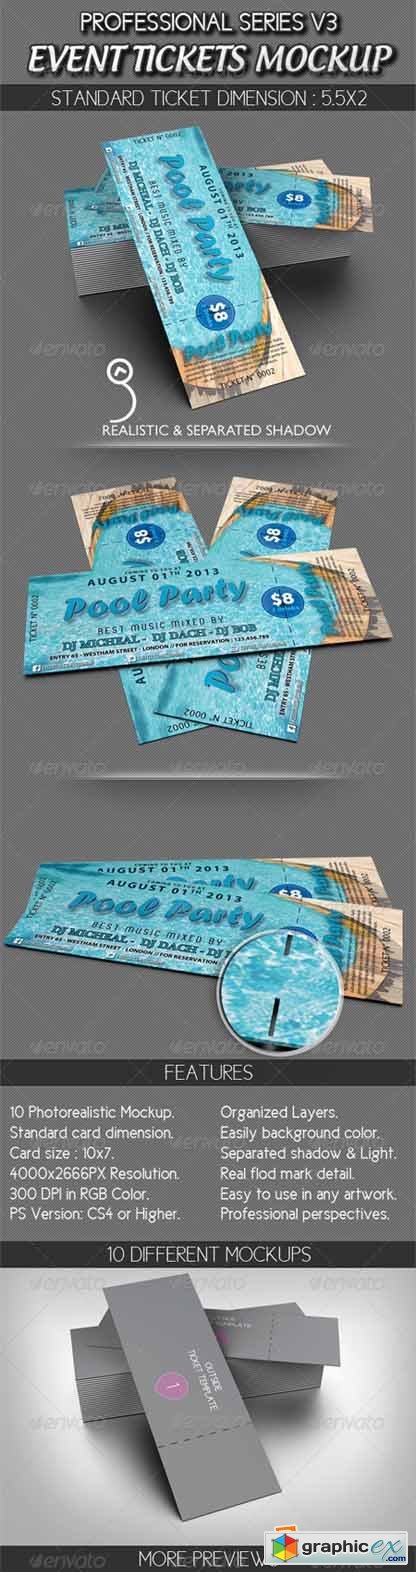 Event Tickets Mockup 2858558